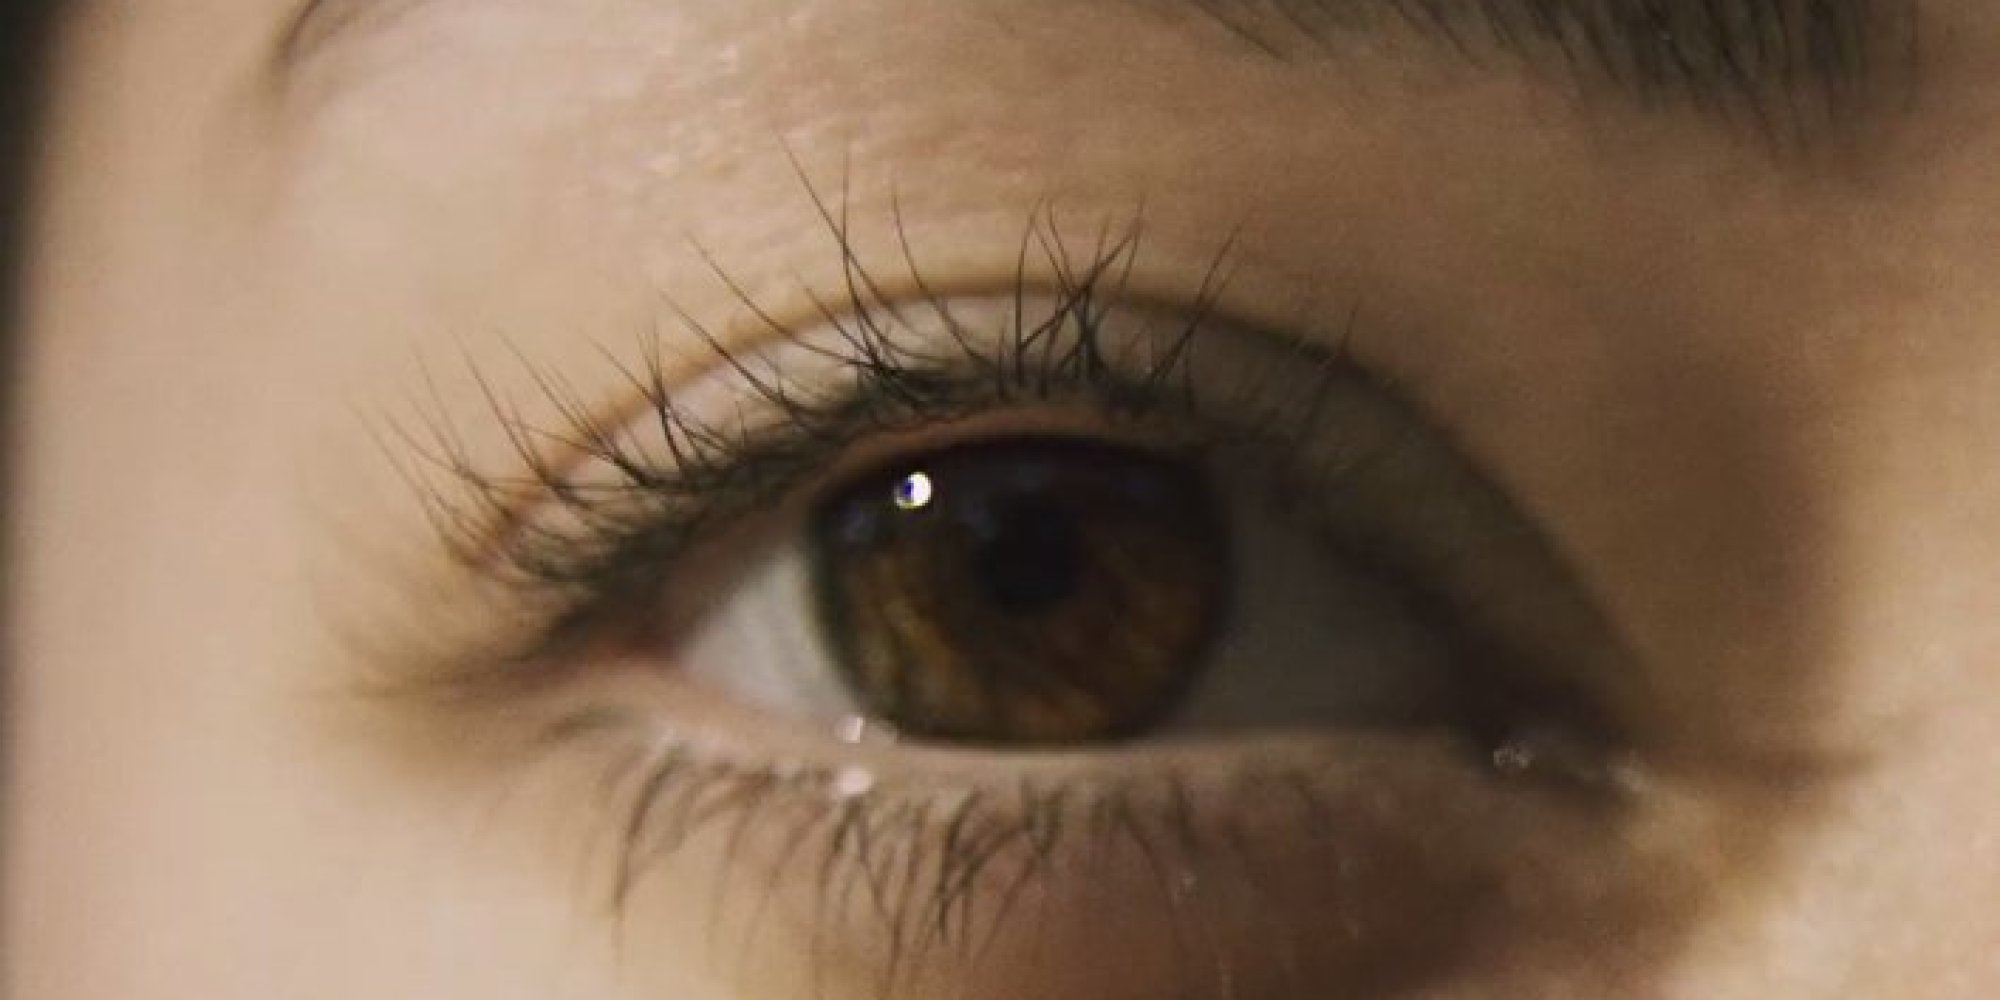 Hypnotic Montage Of Human Eyes Will Leave Your Head Spinning | HuffPost